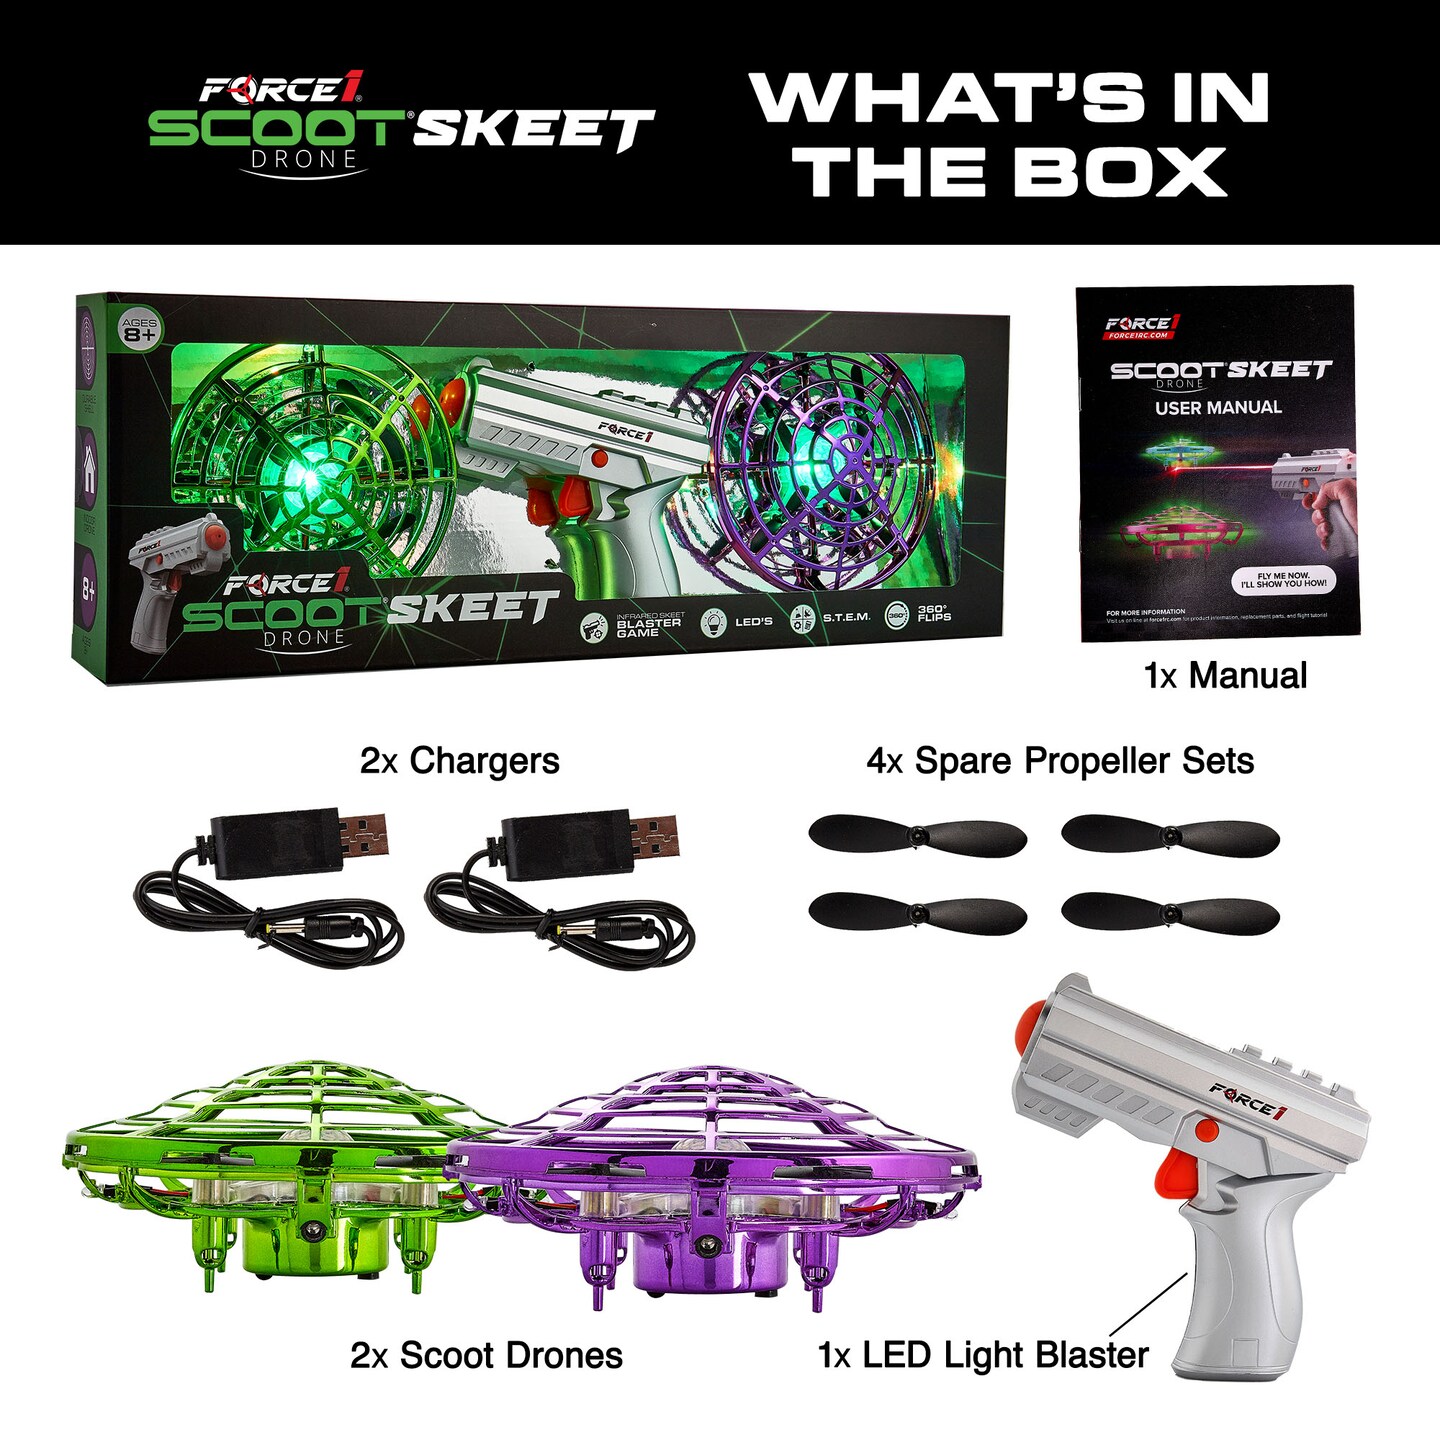 Force1 Scoot Skeet Drone Electronic Shooting Game For Kids and Adults- Purple/Green